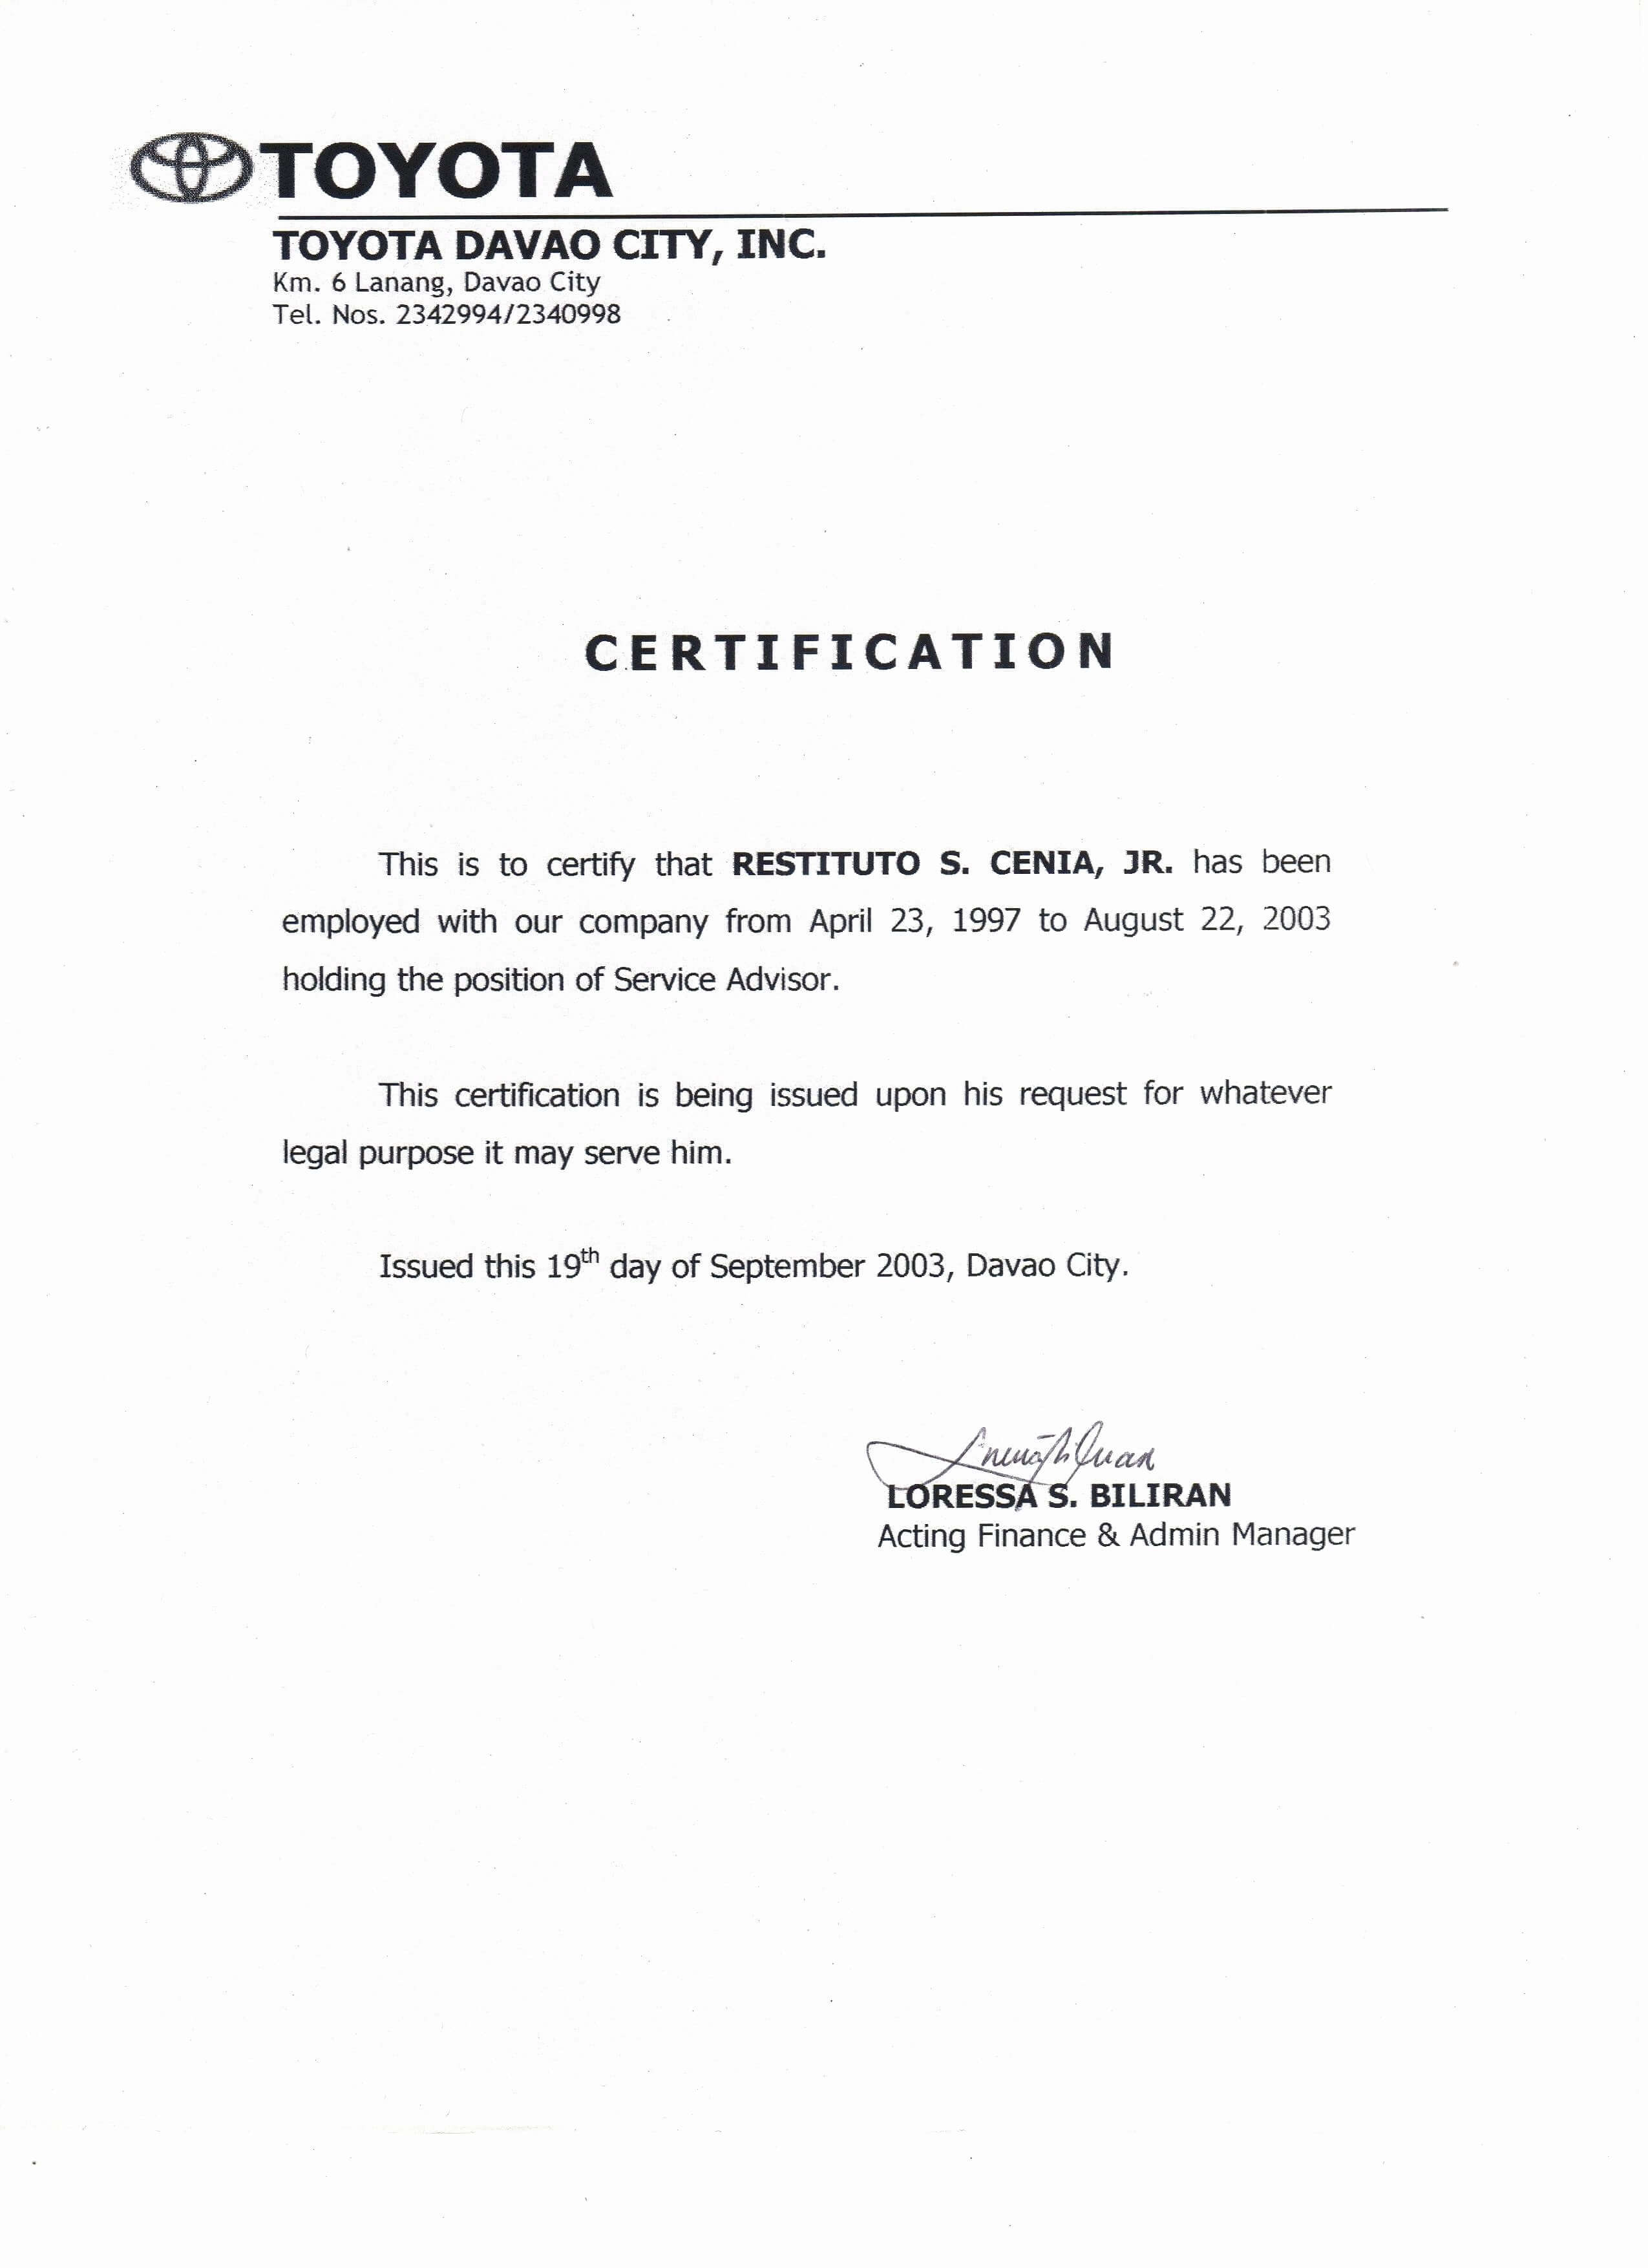 Certificate Of Employment Template | Template Modern Design Within Certificate Of Employment Template